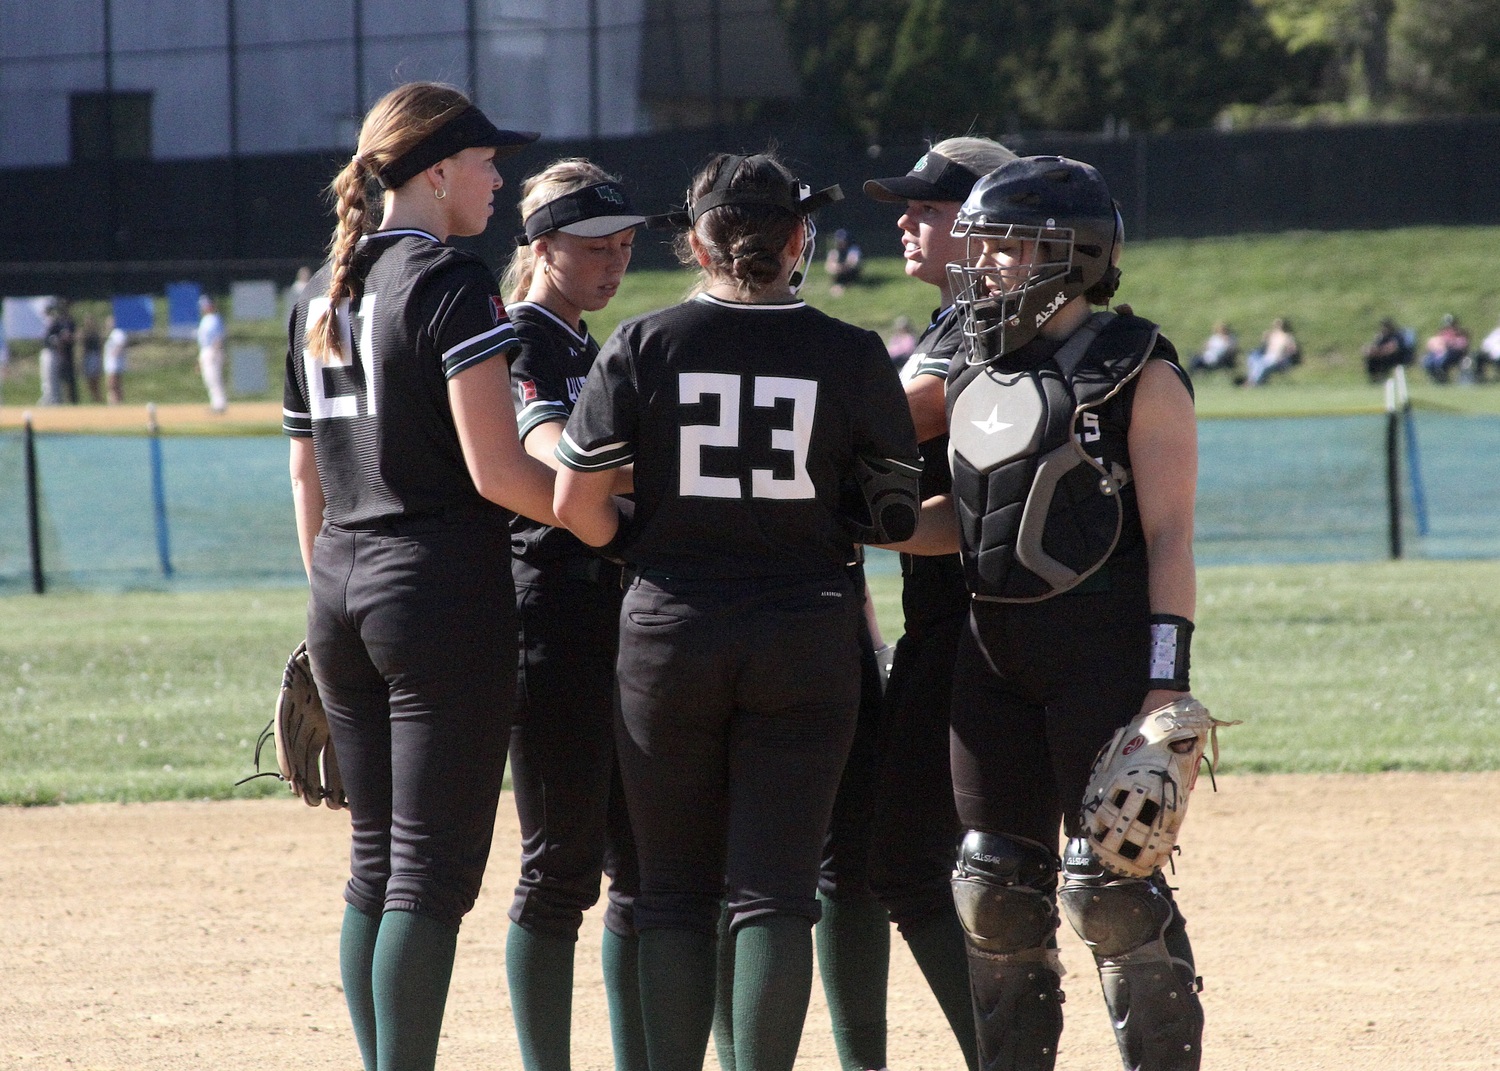 Westhampton Beach's infield comes together before the start of the game against Rocky Point. DESIRÉE KEEGAN